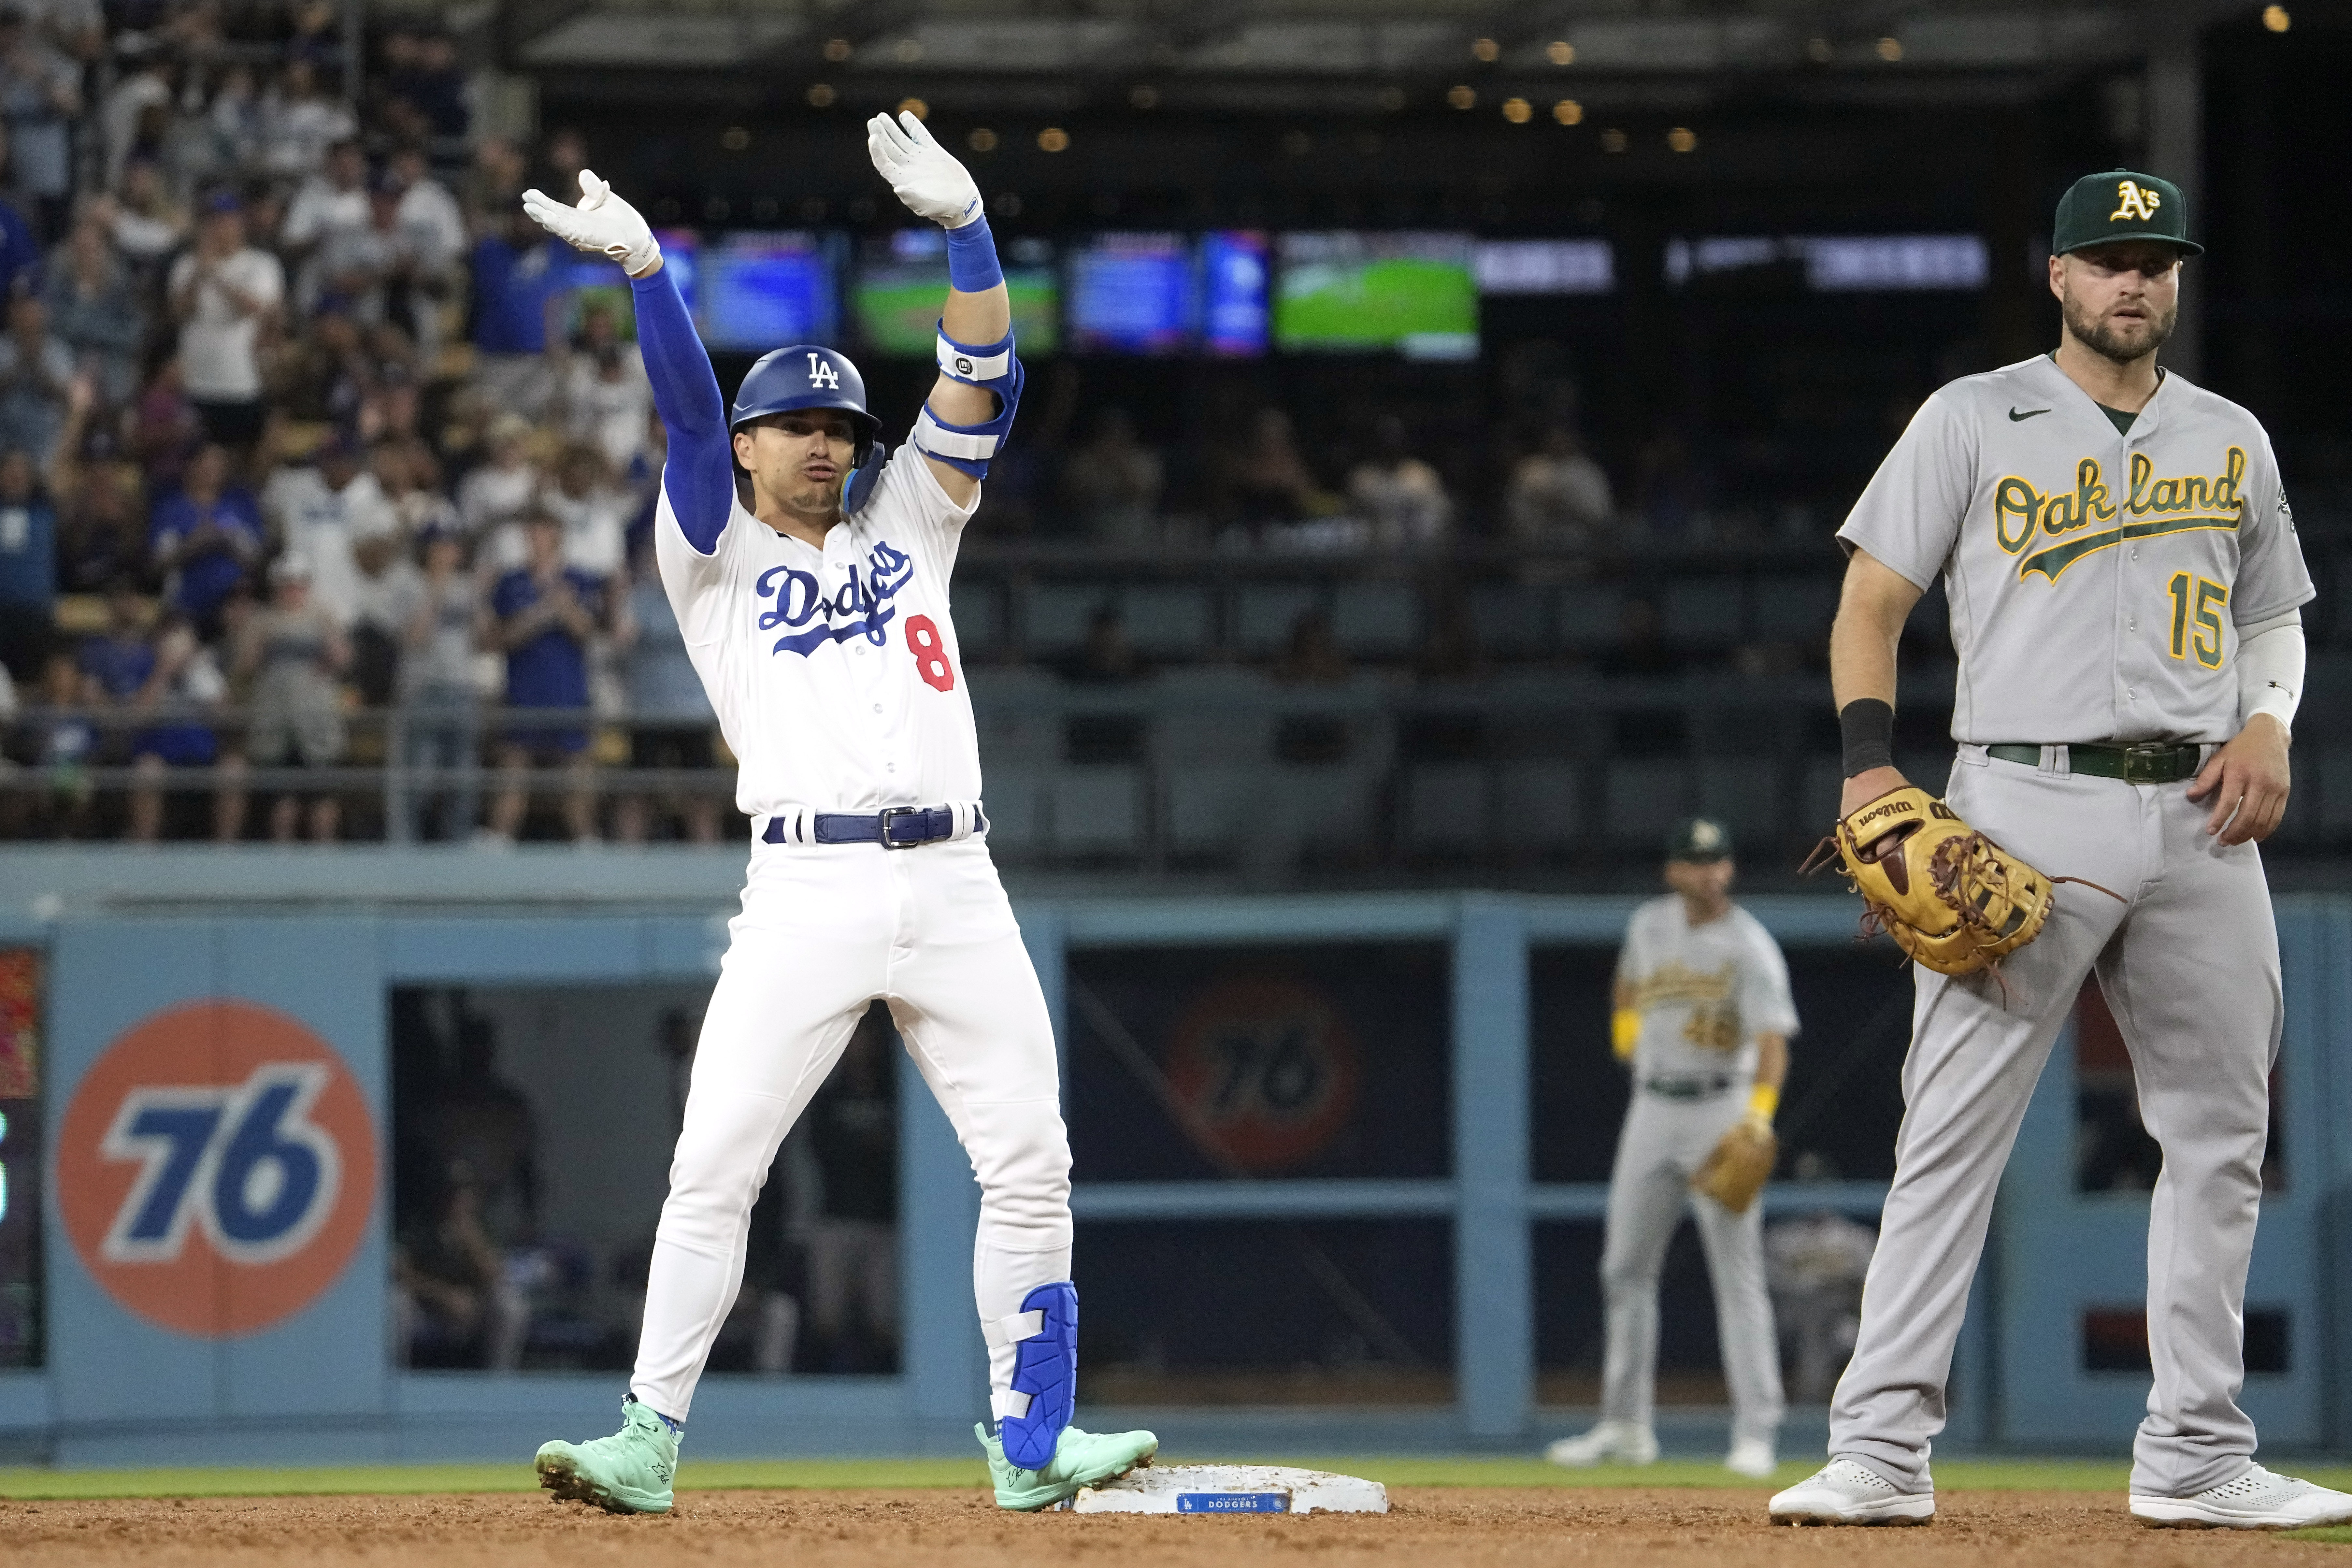 Ex-Red Sox Kiké Hernández has big hit, now hitting .308 so far with Dodgers  